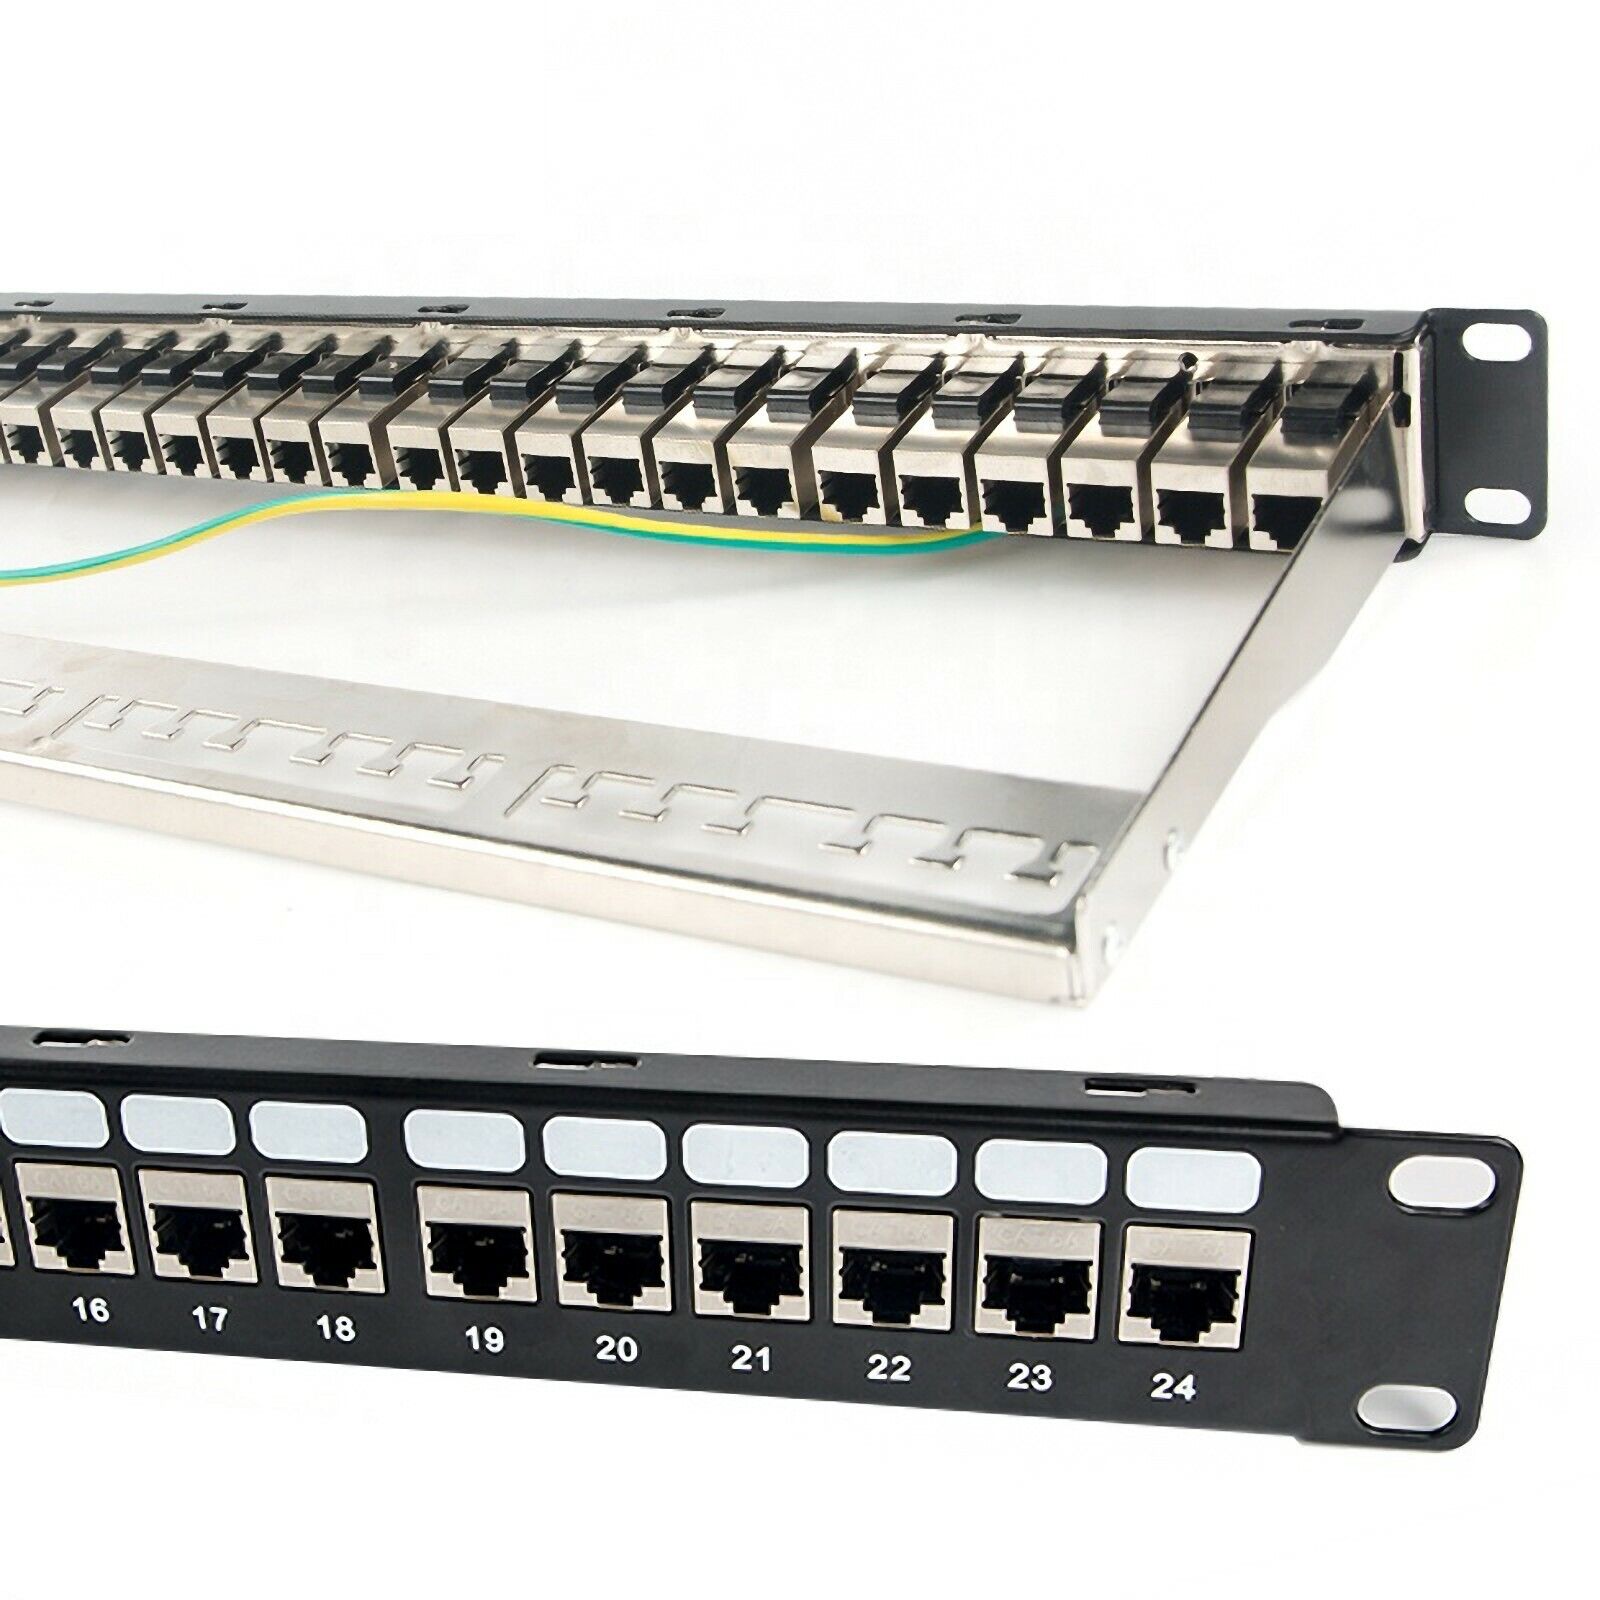 Patch Panel 24 Port Cat6A with Inline Keystone, Coupler Patch Panel STP Shielded